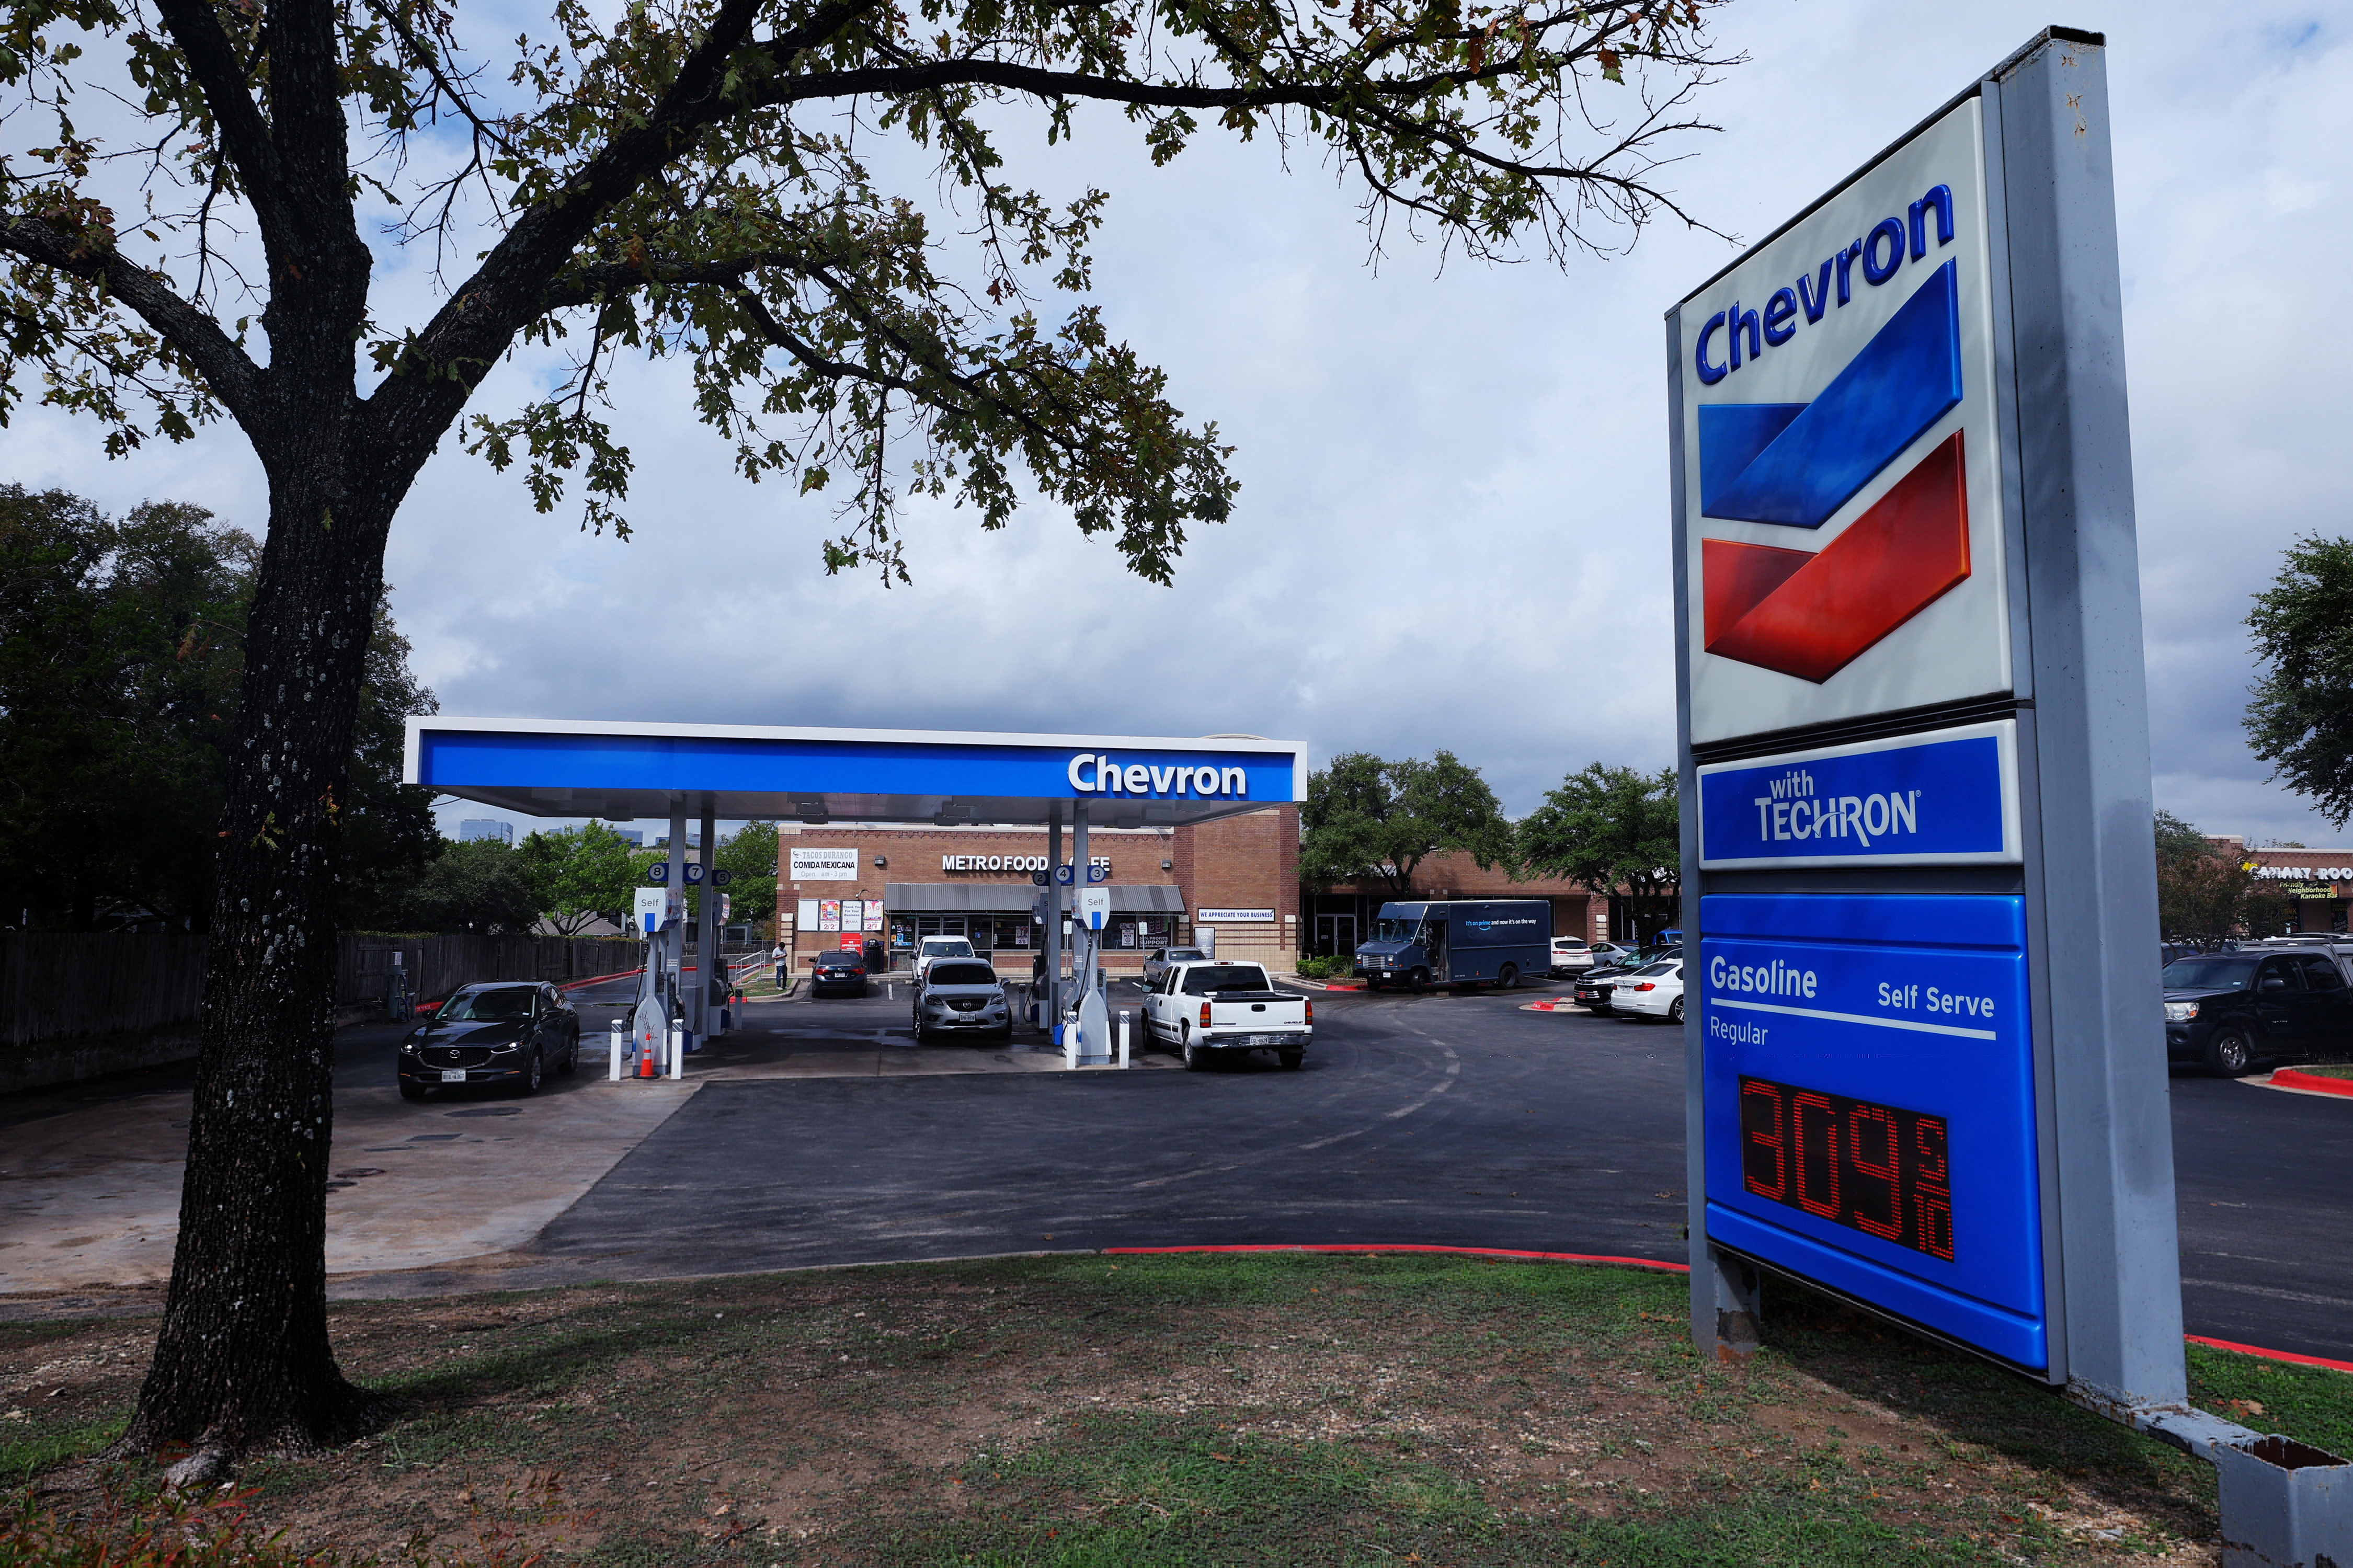 A Chevron gas station is seen in Austin